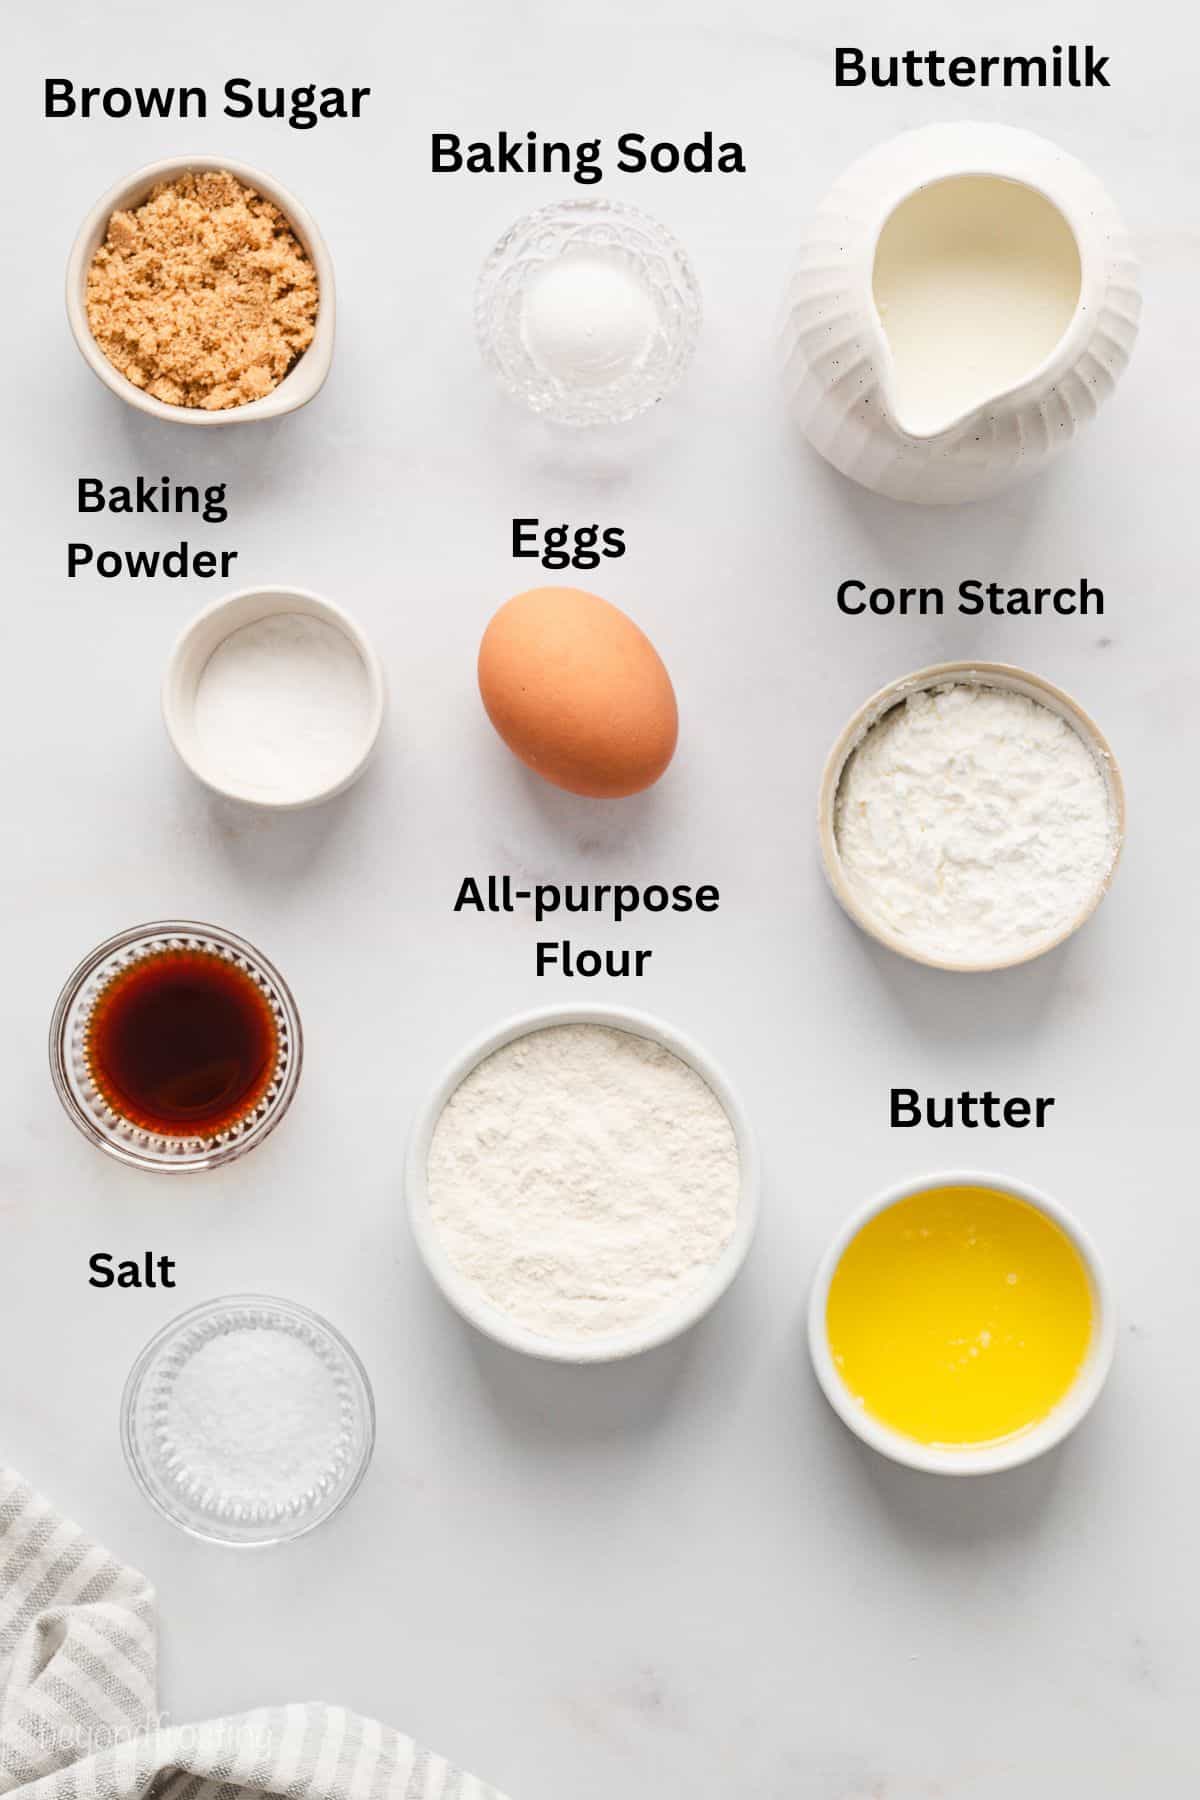 Ingredients for buttermilk waffles with text labels overlaying each ingredient.